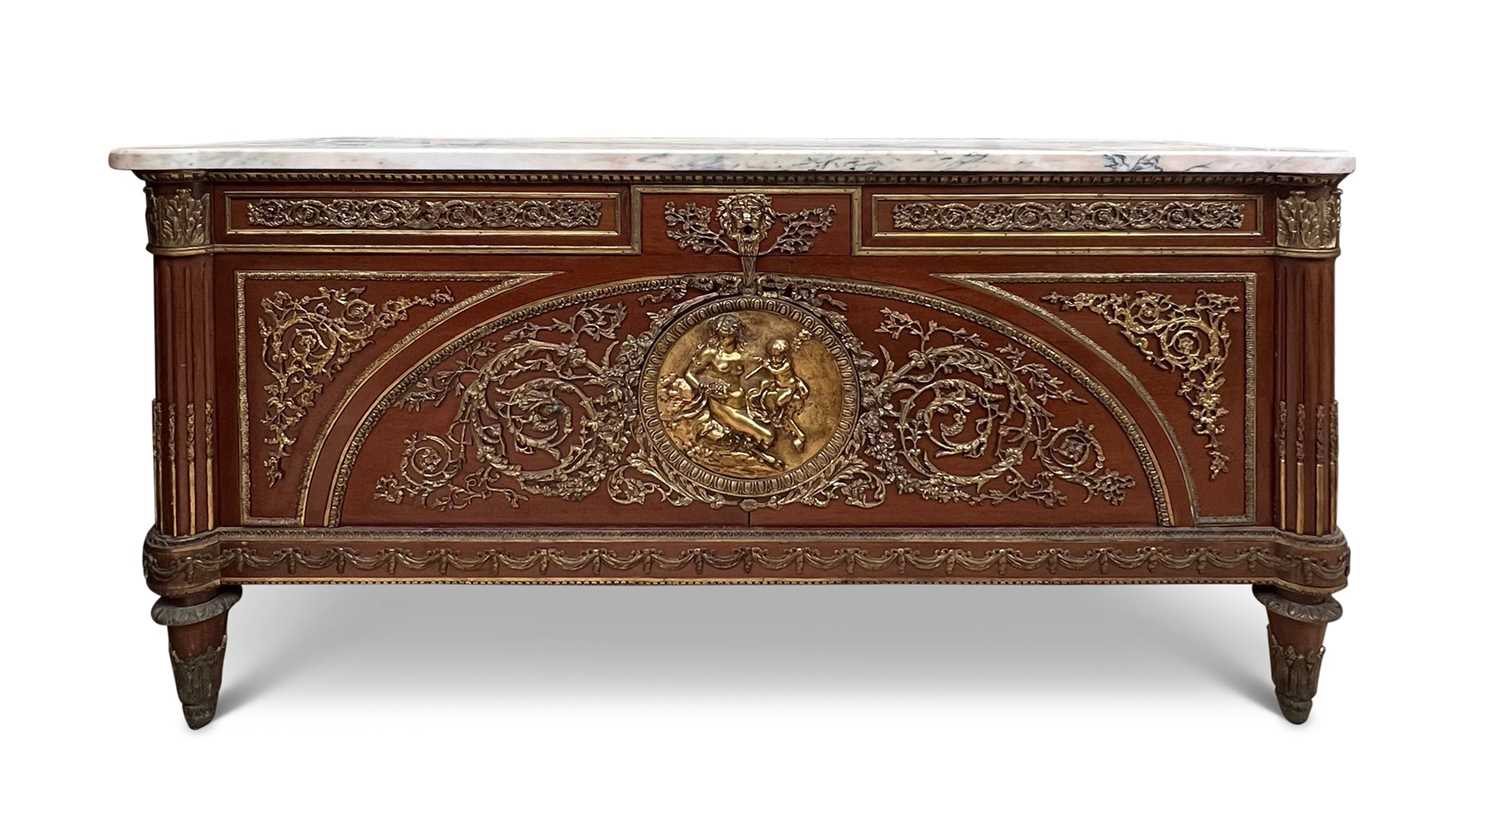 AN IMPRESSIVE ORMOLU MOUNTED COMMODE AFTER THE MODEL PRODUCED FOR MARIE-ANTOINETTE - Image 2 of 3